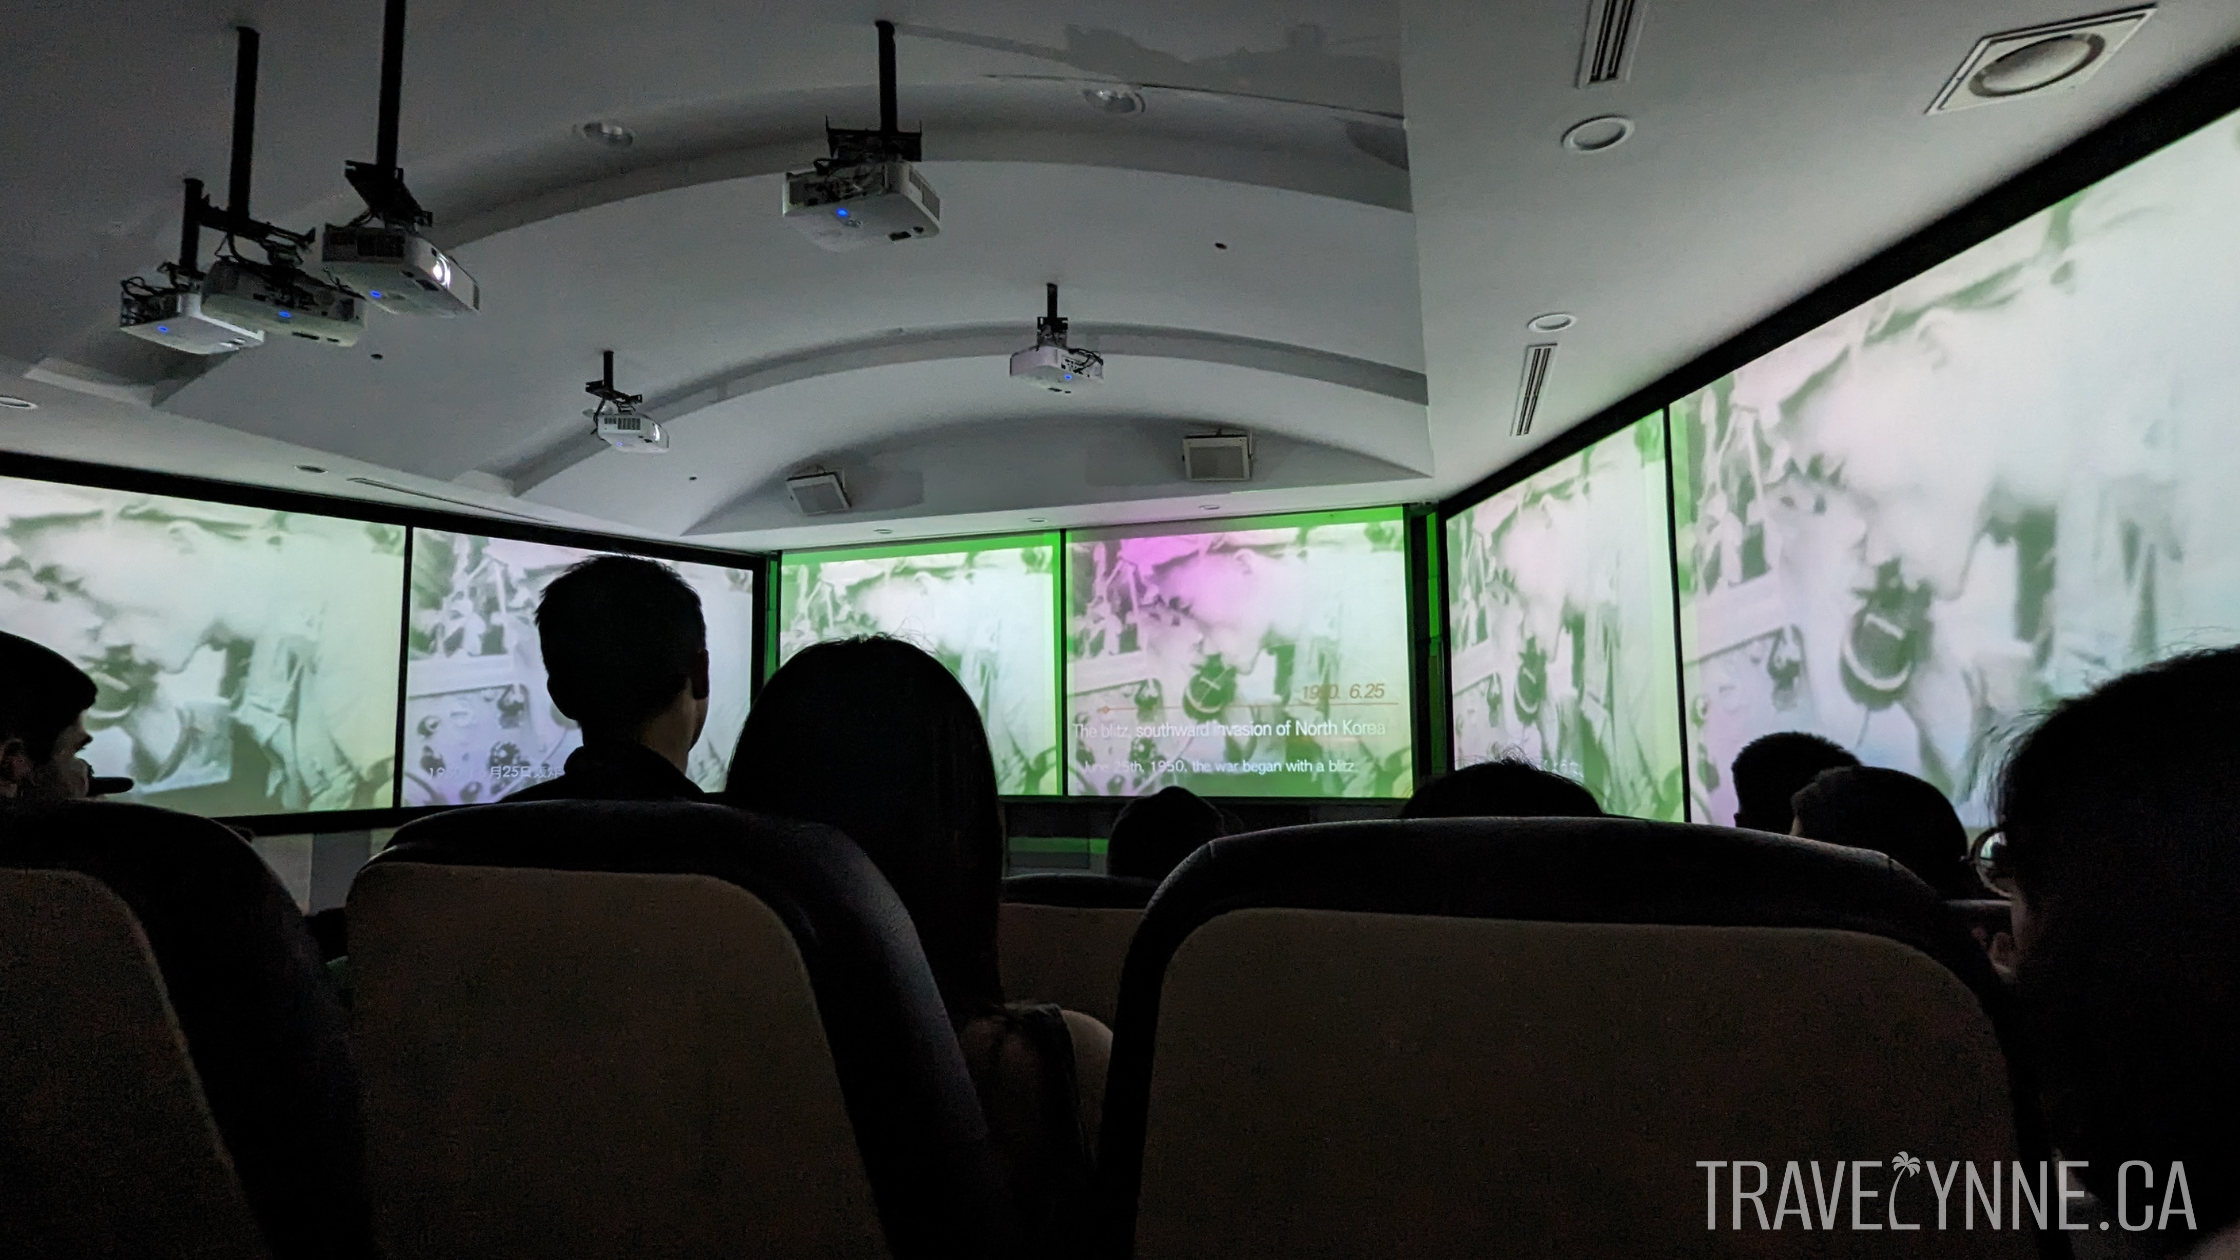 Before going into the third infiltration tunnel, visitors gather in a small theatre to watch a short video about the history of the DMZ.